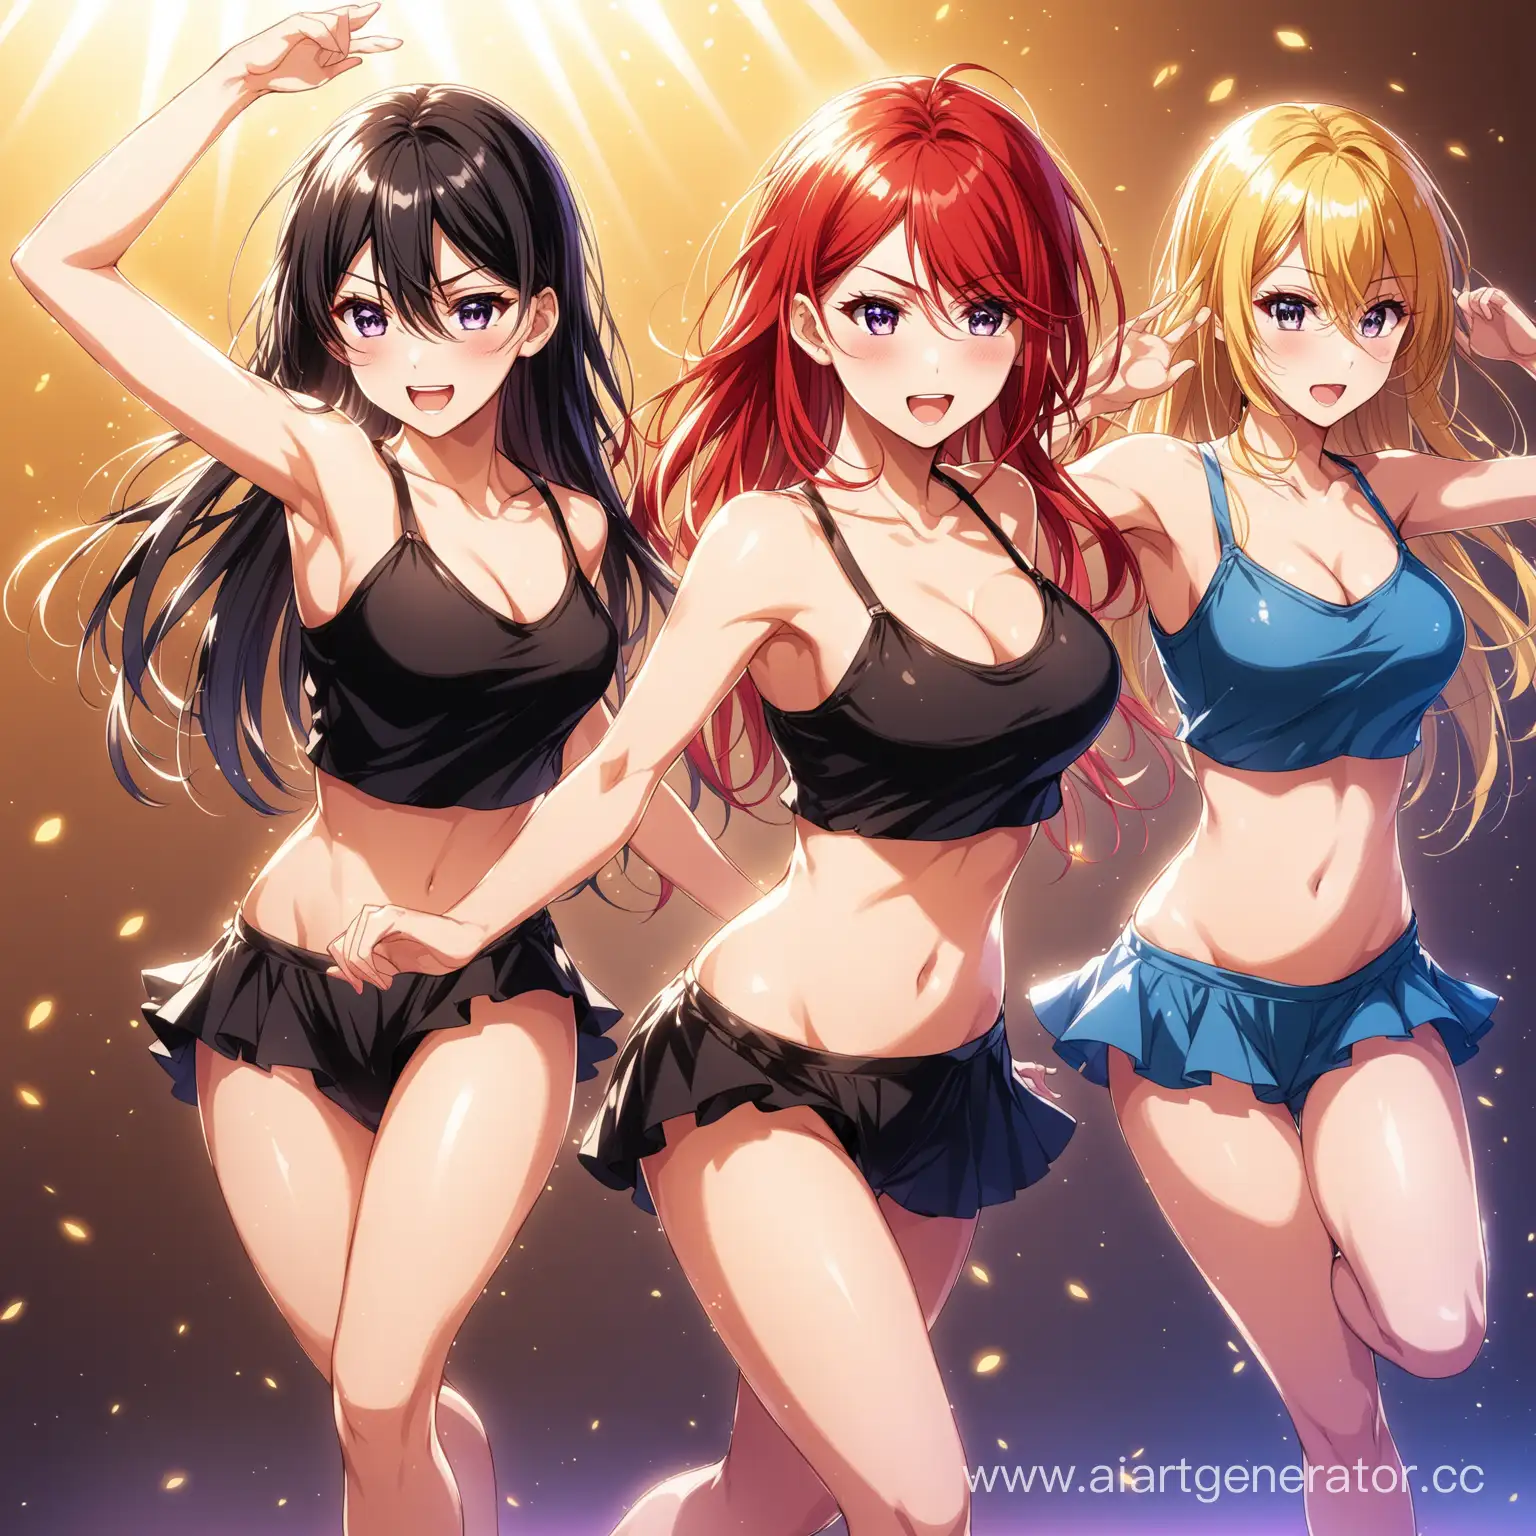 Energetic-Anime-Women-Dancing-the-Griddy-Dance